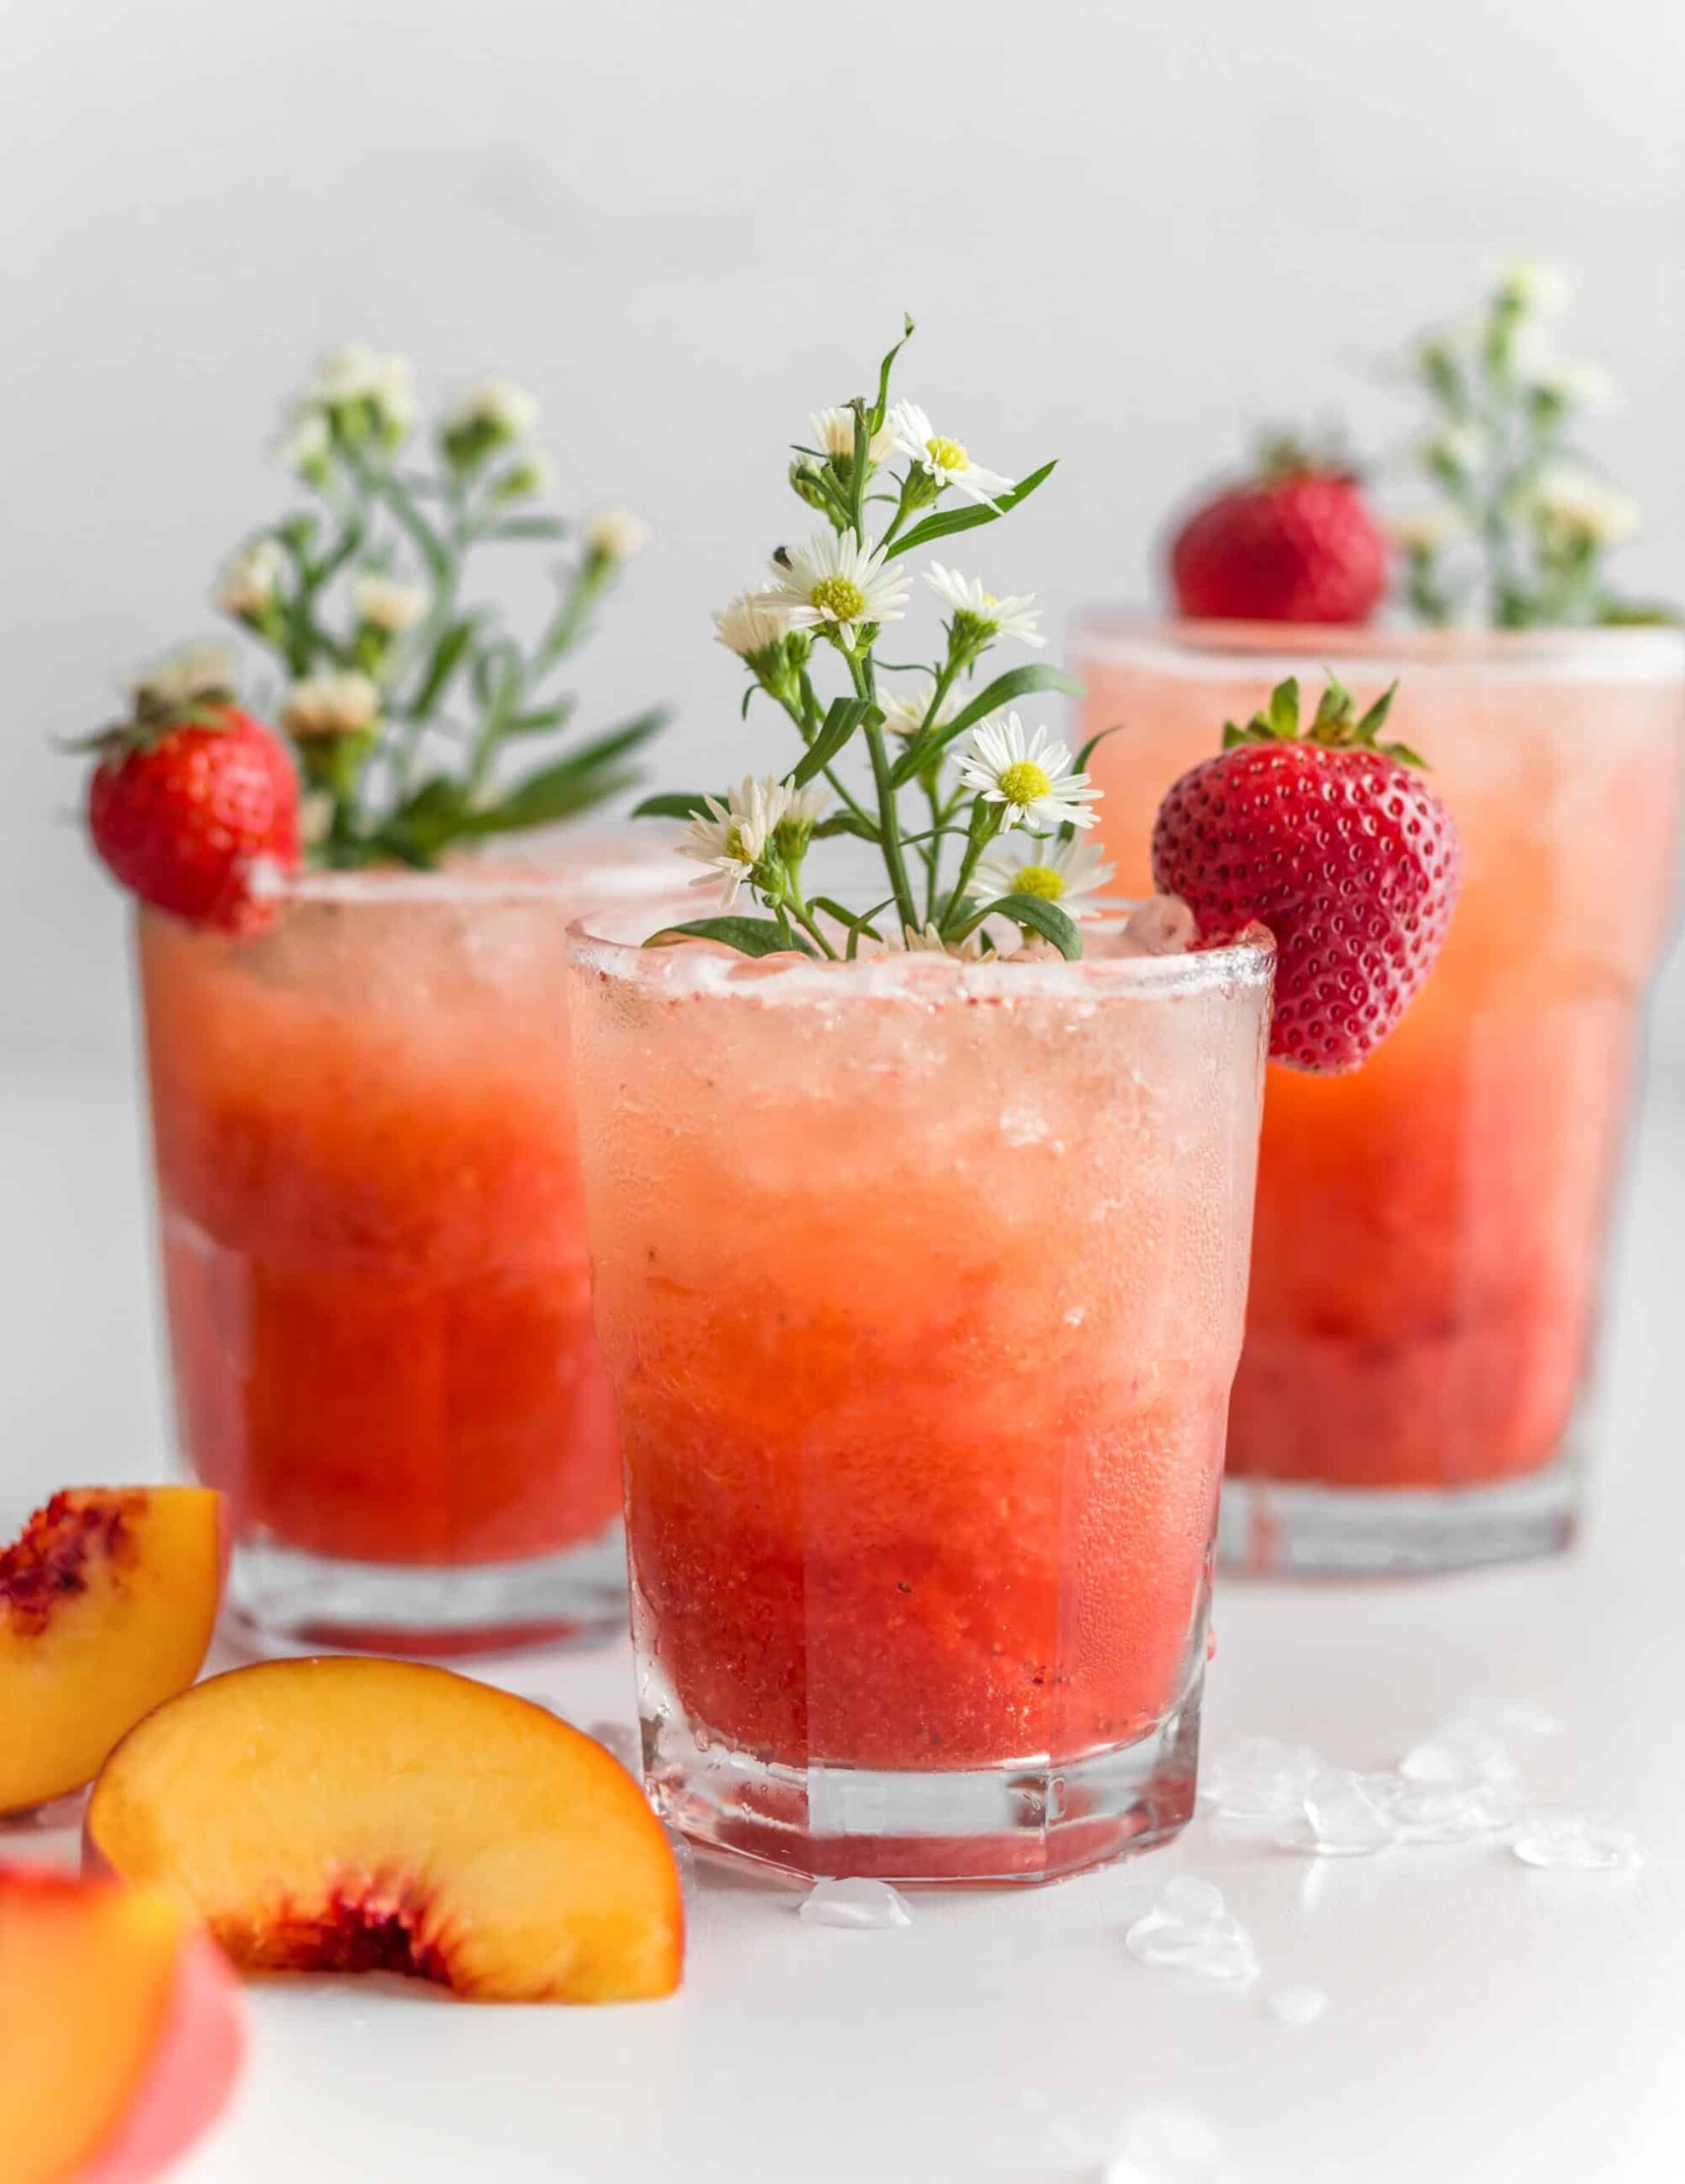 Bubbly Strawberry Peach Sprirtzer In a Glass Garnished with a Fresh Strawberry